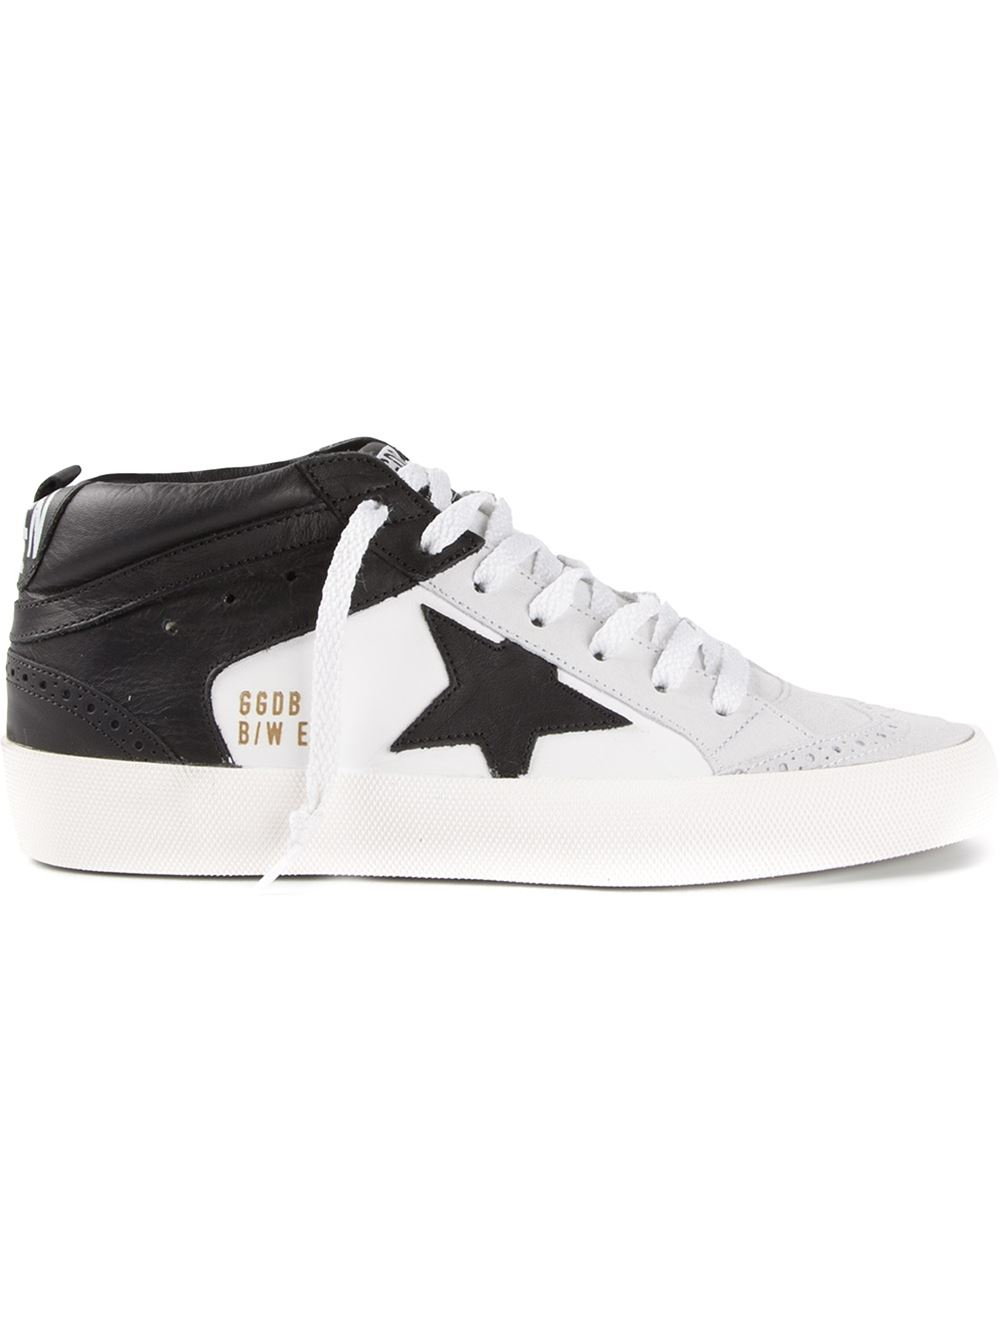 Golden Goose \'Mid/Star Limited Edition\' Sneakers in Black | Lyst